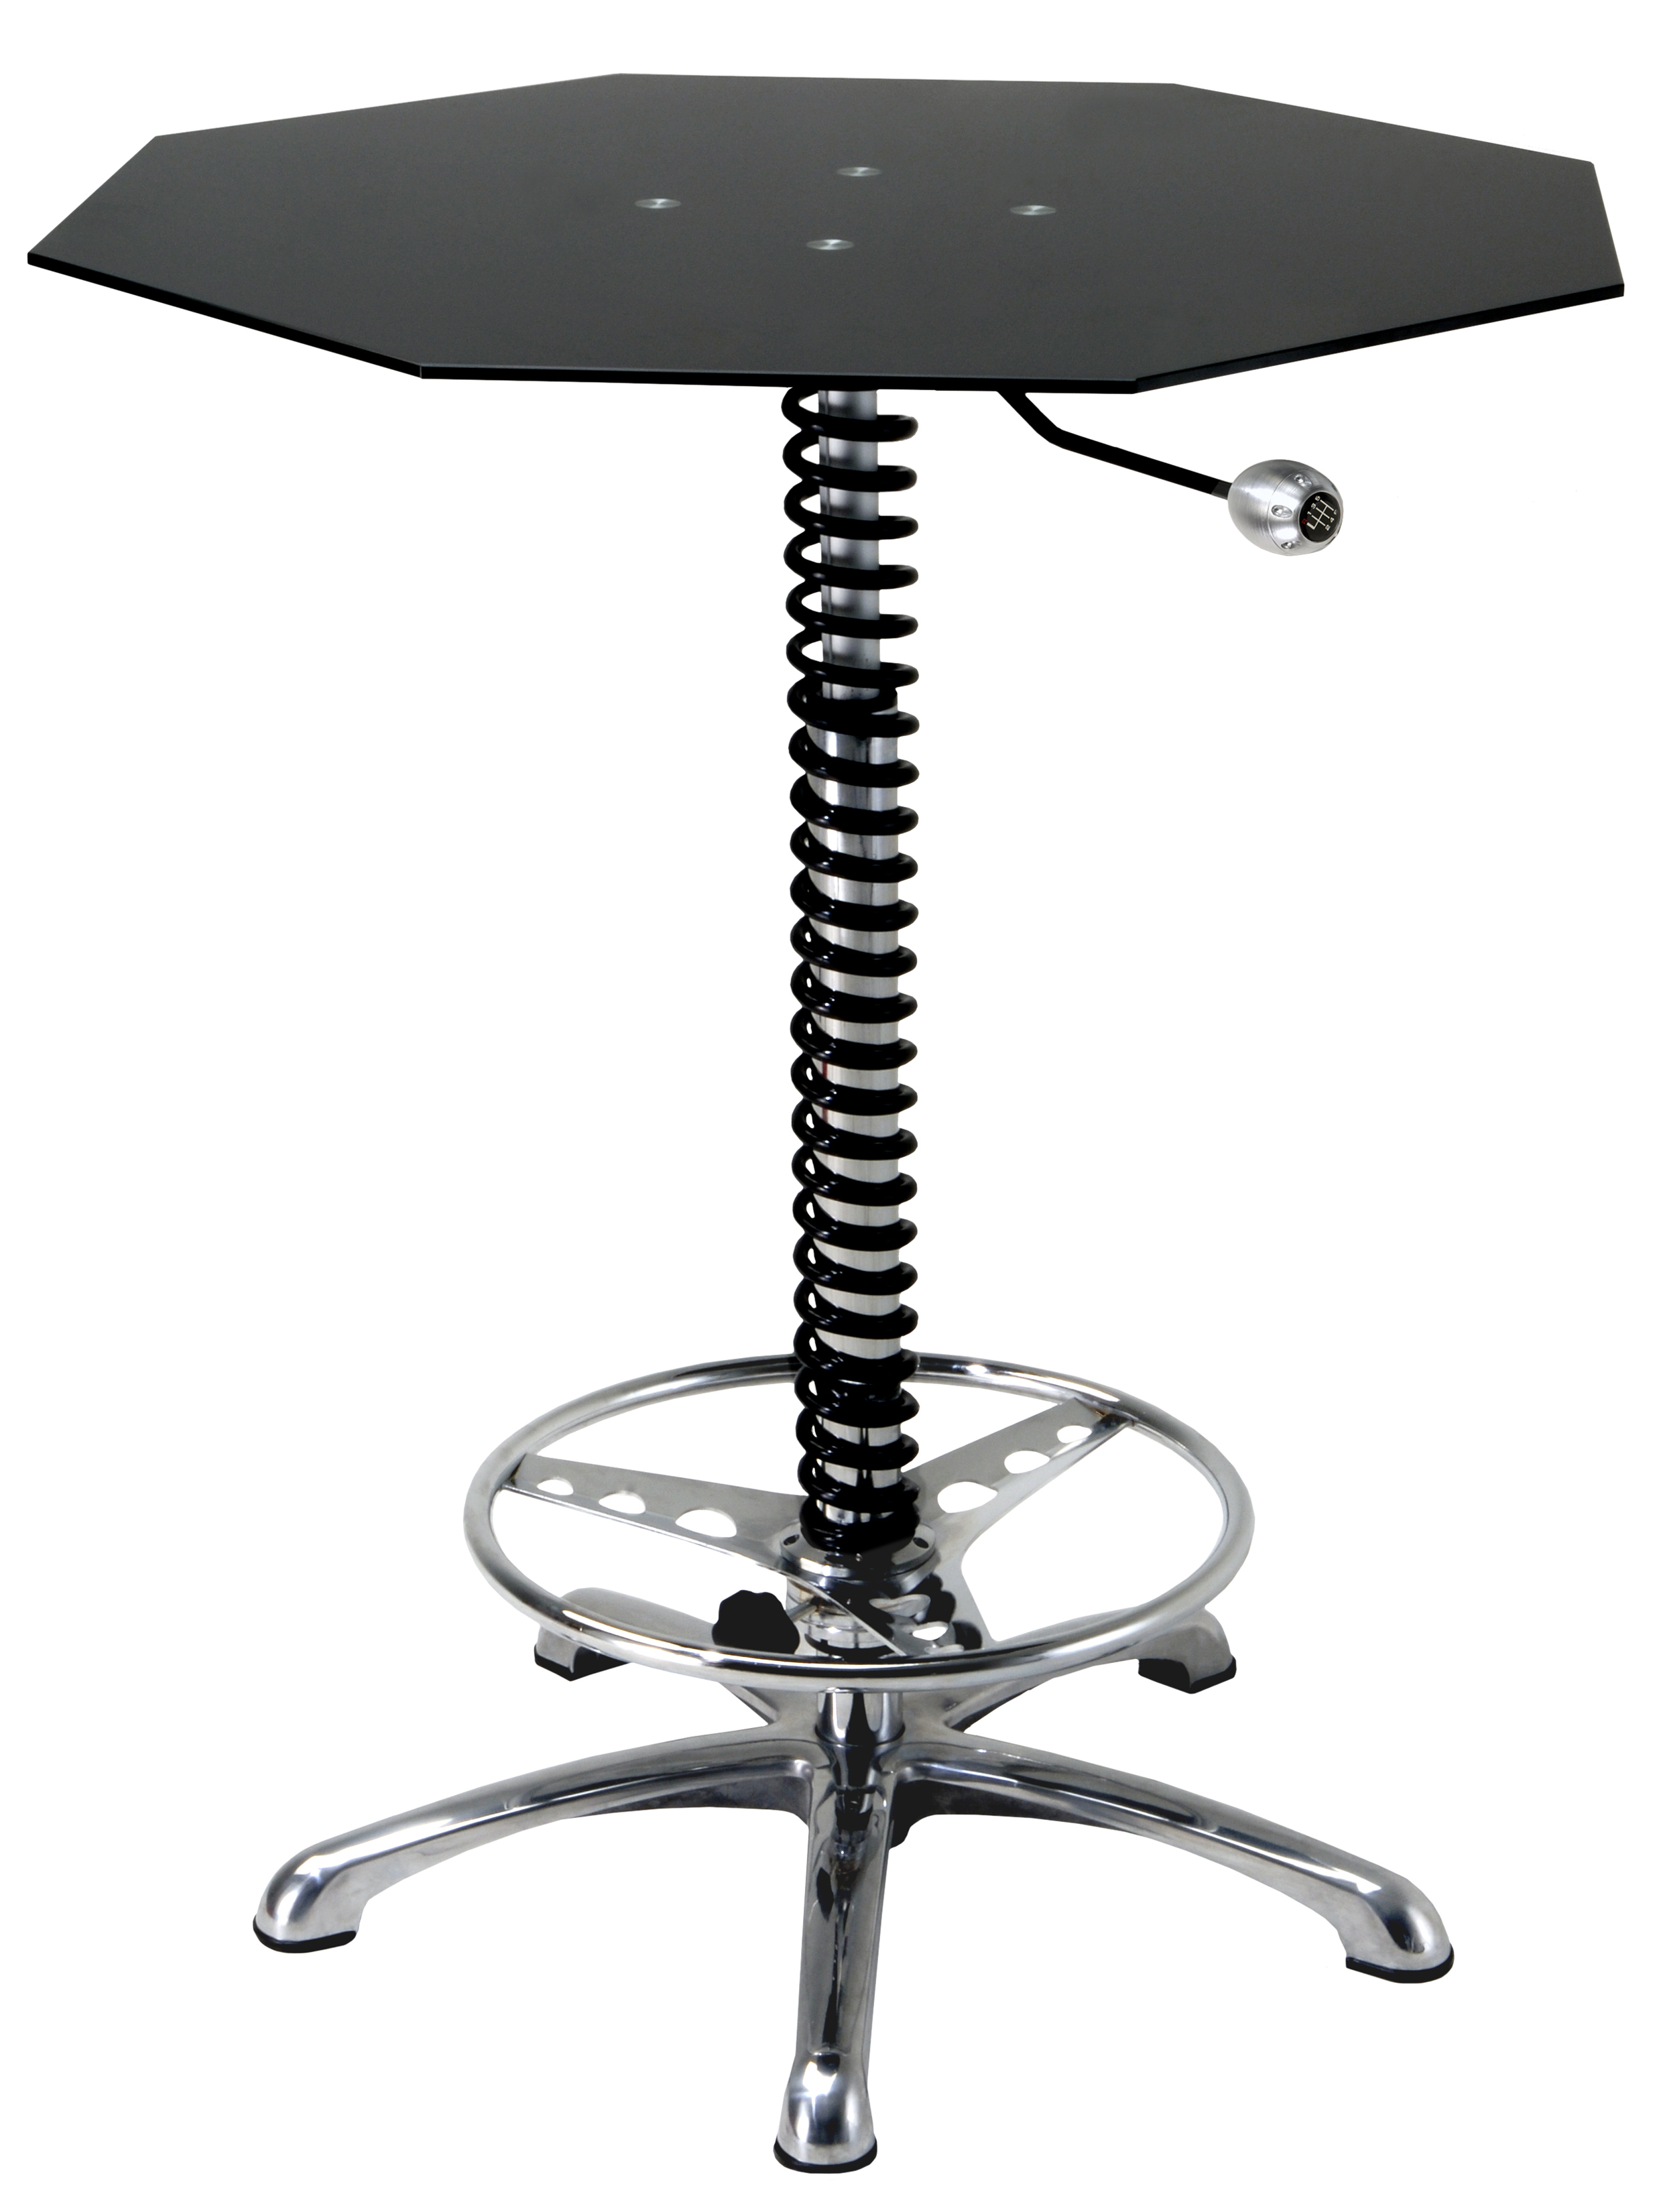 Intro-Tech Automotive, Pitstop Furniture, BT7000B Chief Table Black, Bar Table